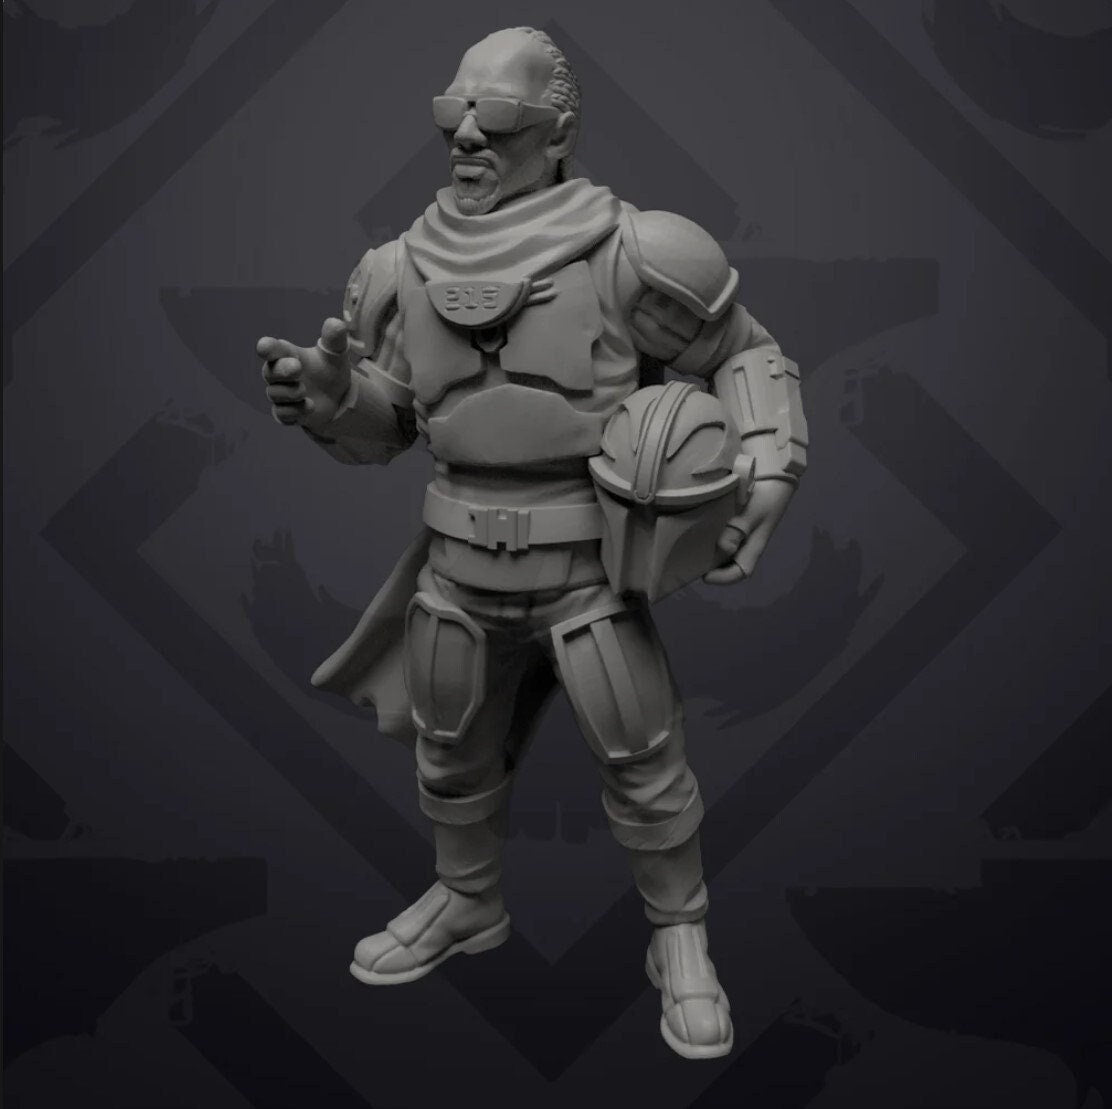 Wizzle Crusader Miniature - SW Legion Compatible (38-40mm tall) Resin 3D Print - Skullforge Studios - Gootzy Gaming